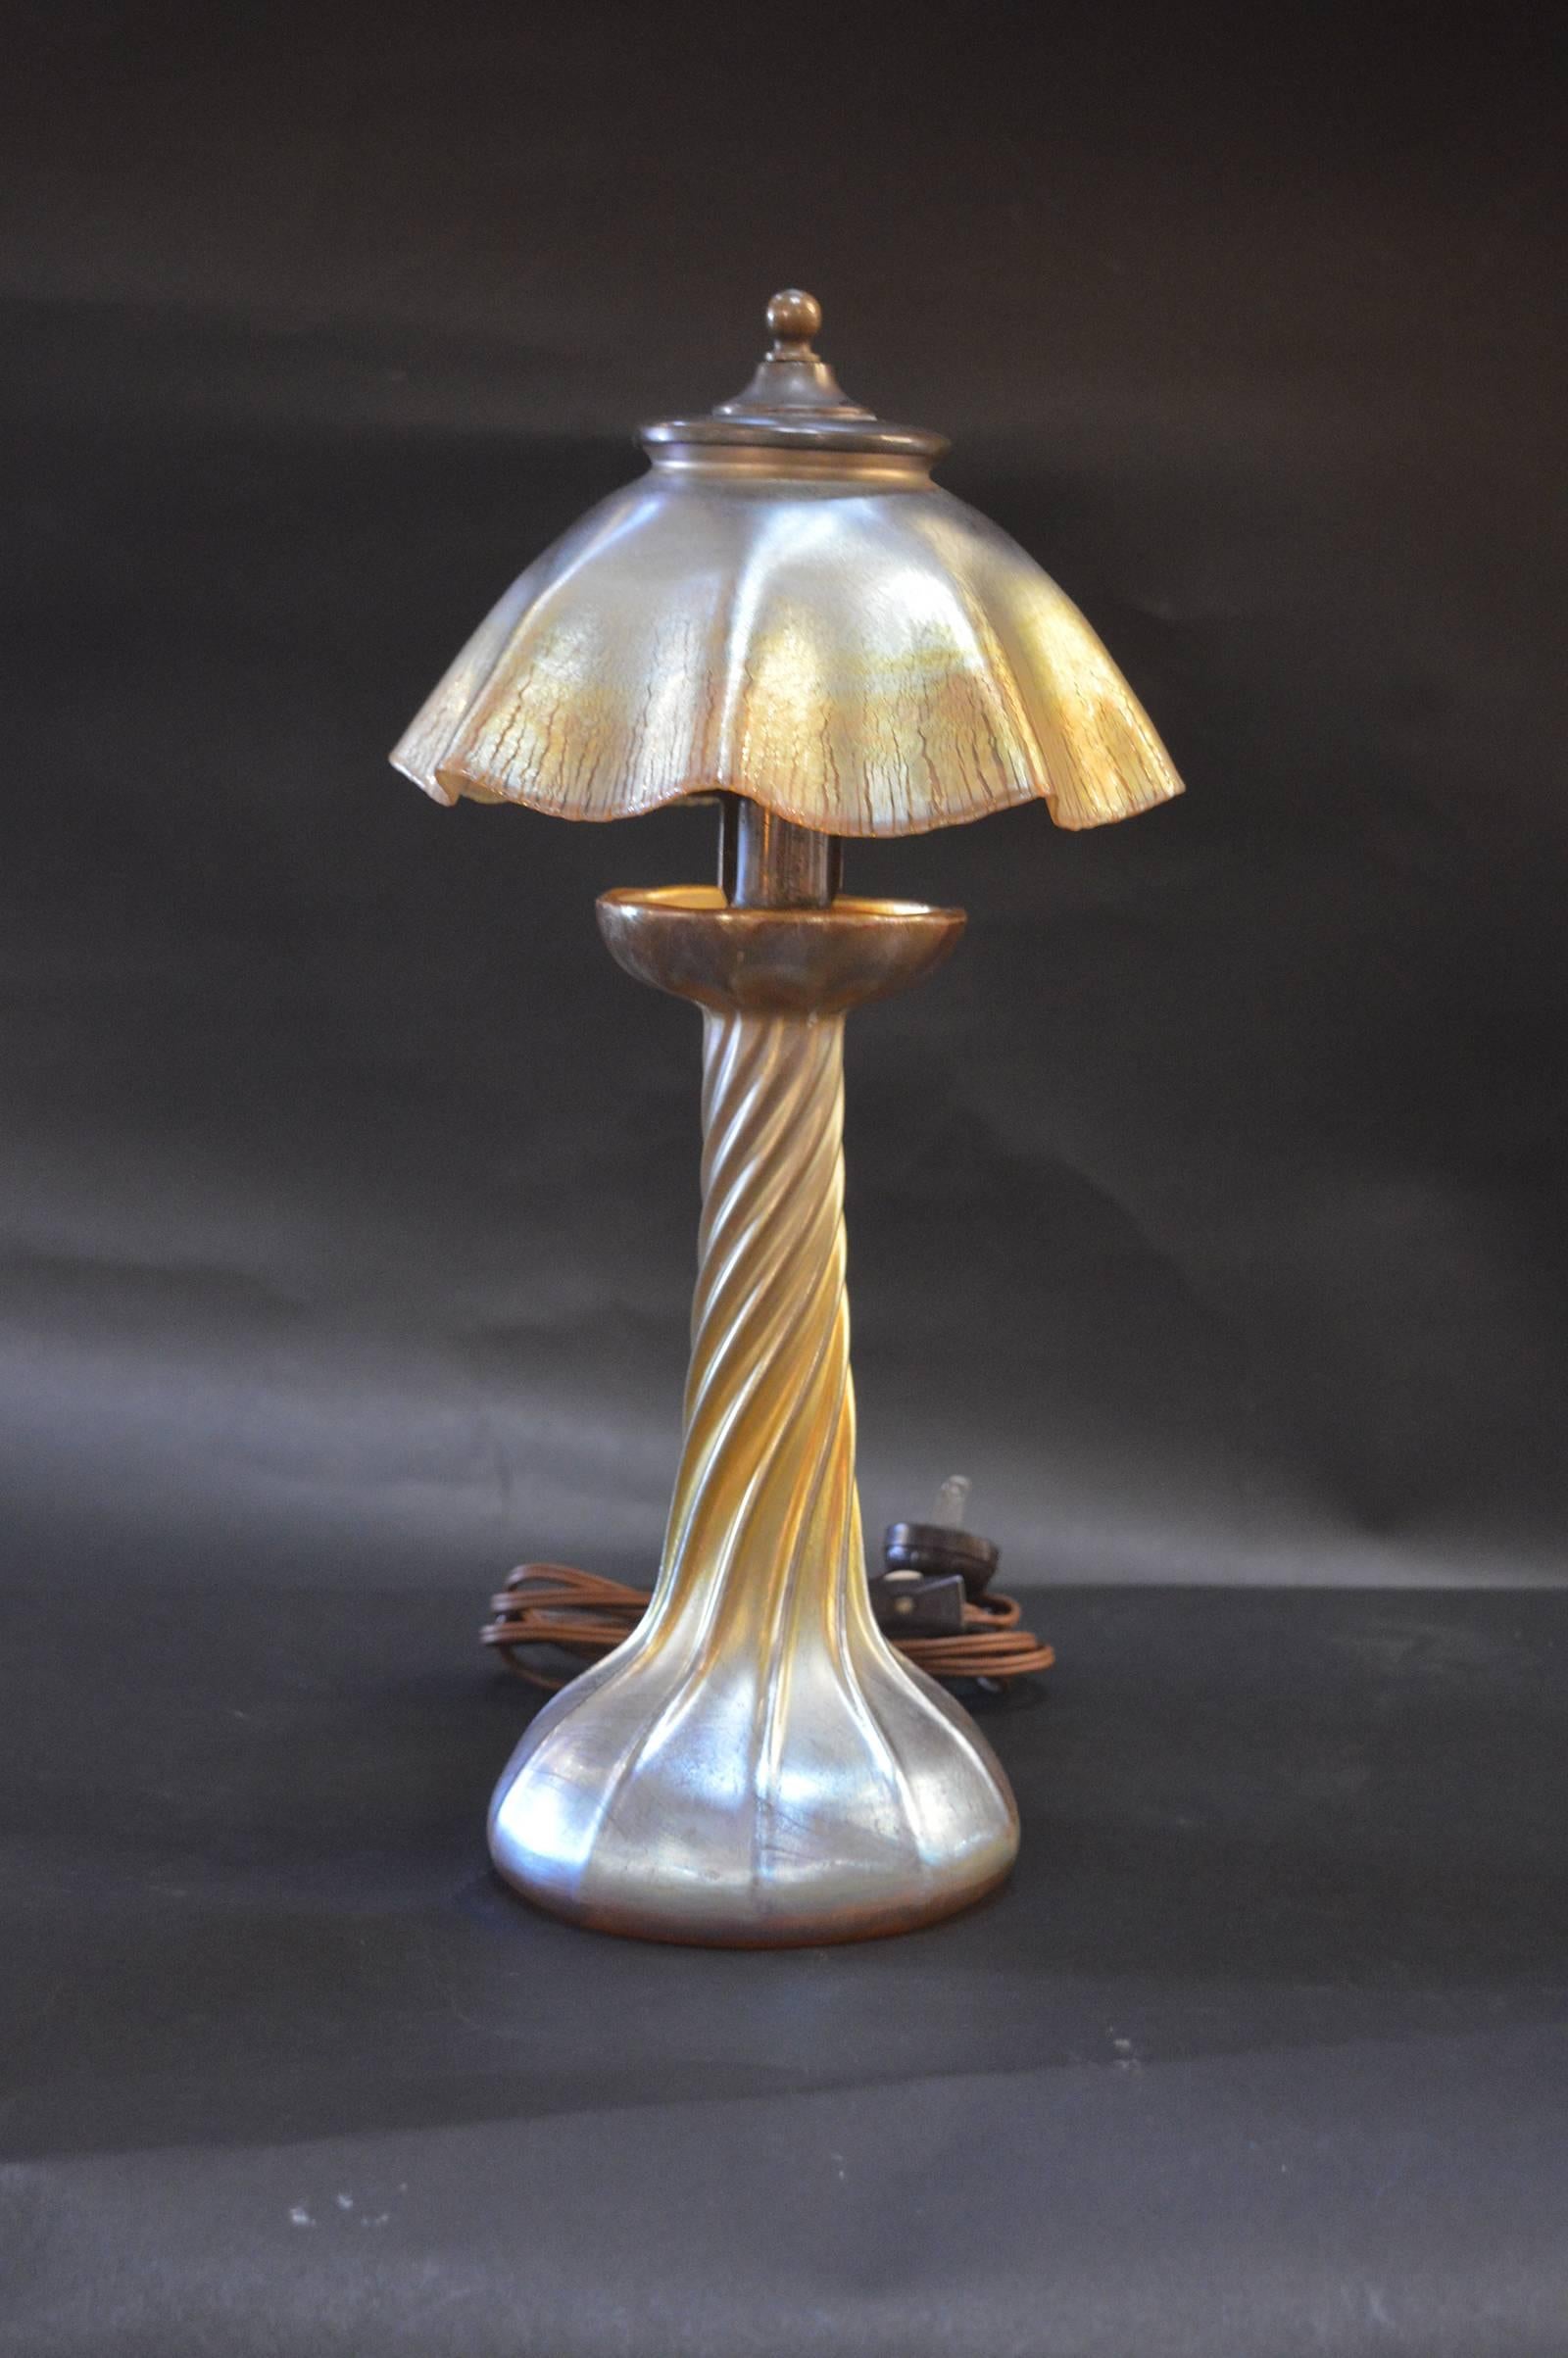 Tiffany table lamp, signed L.C.T on base.